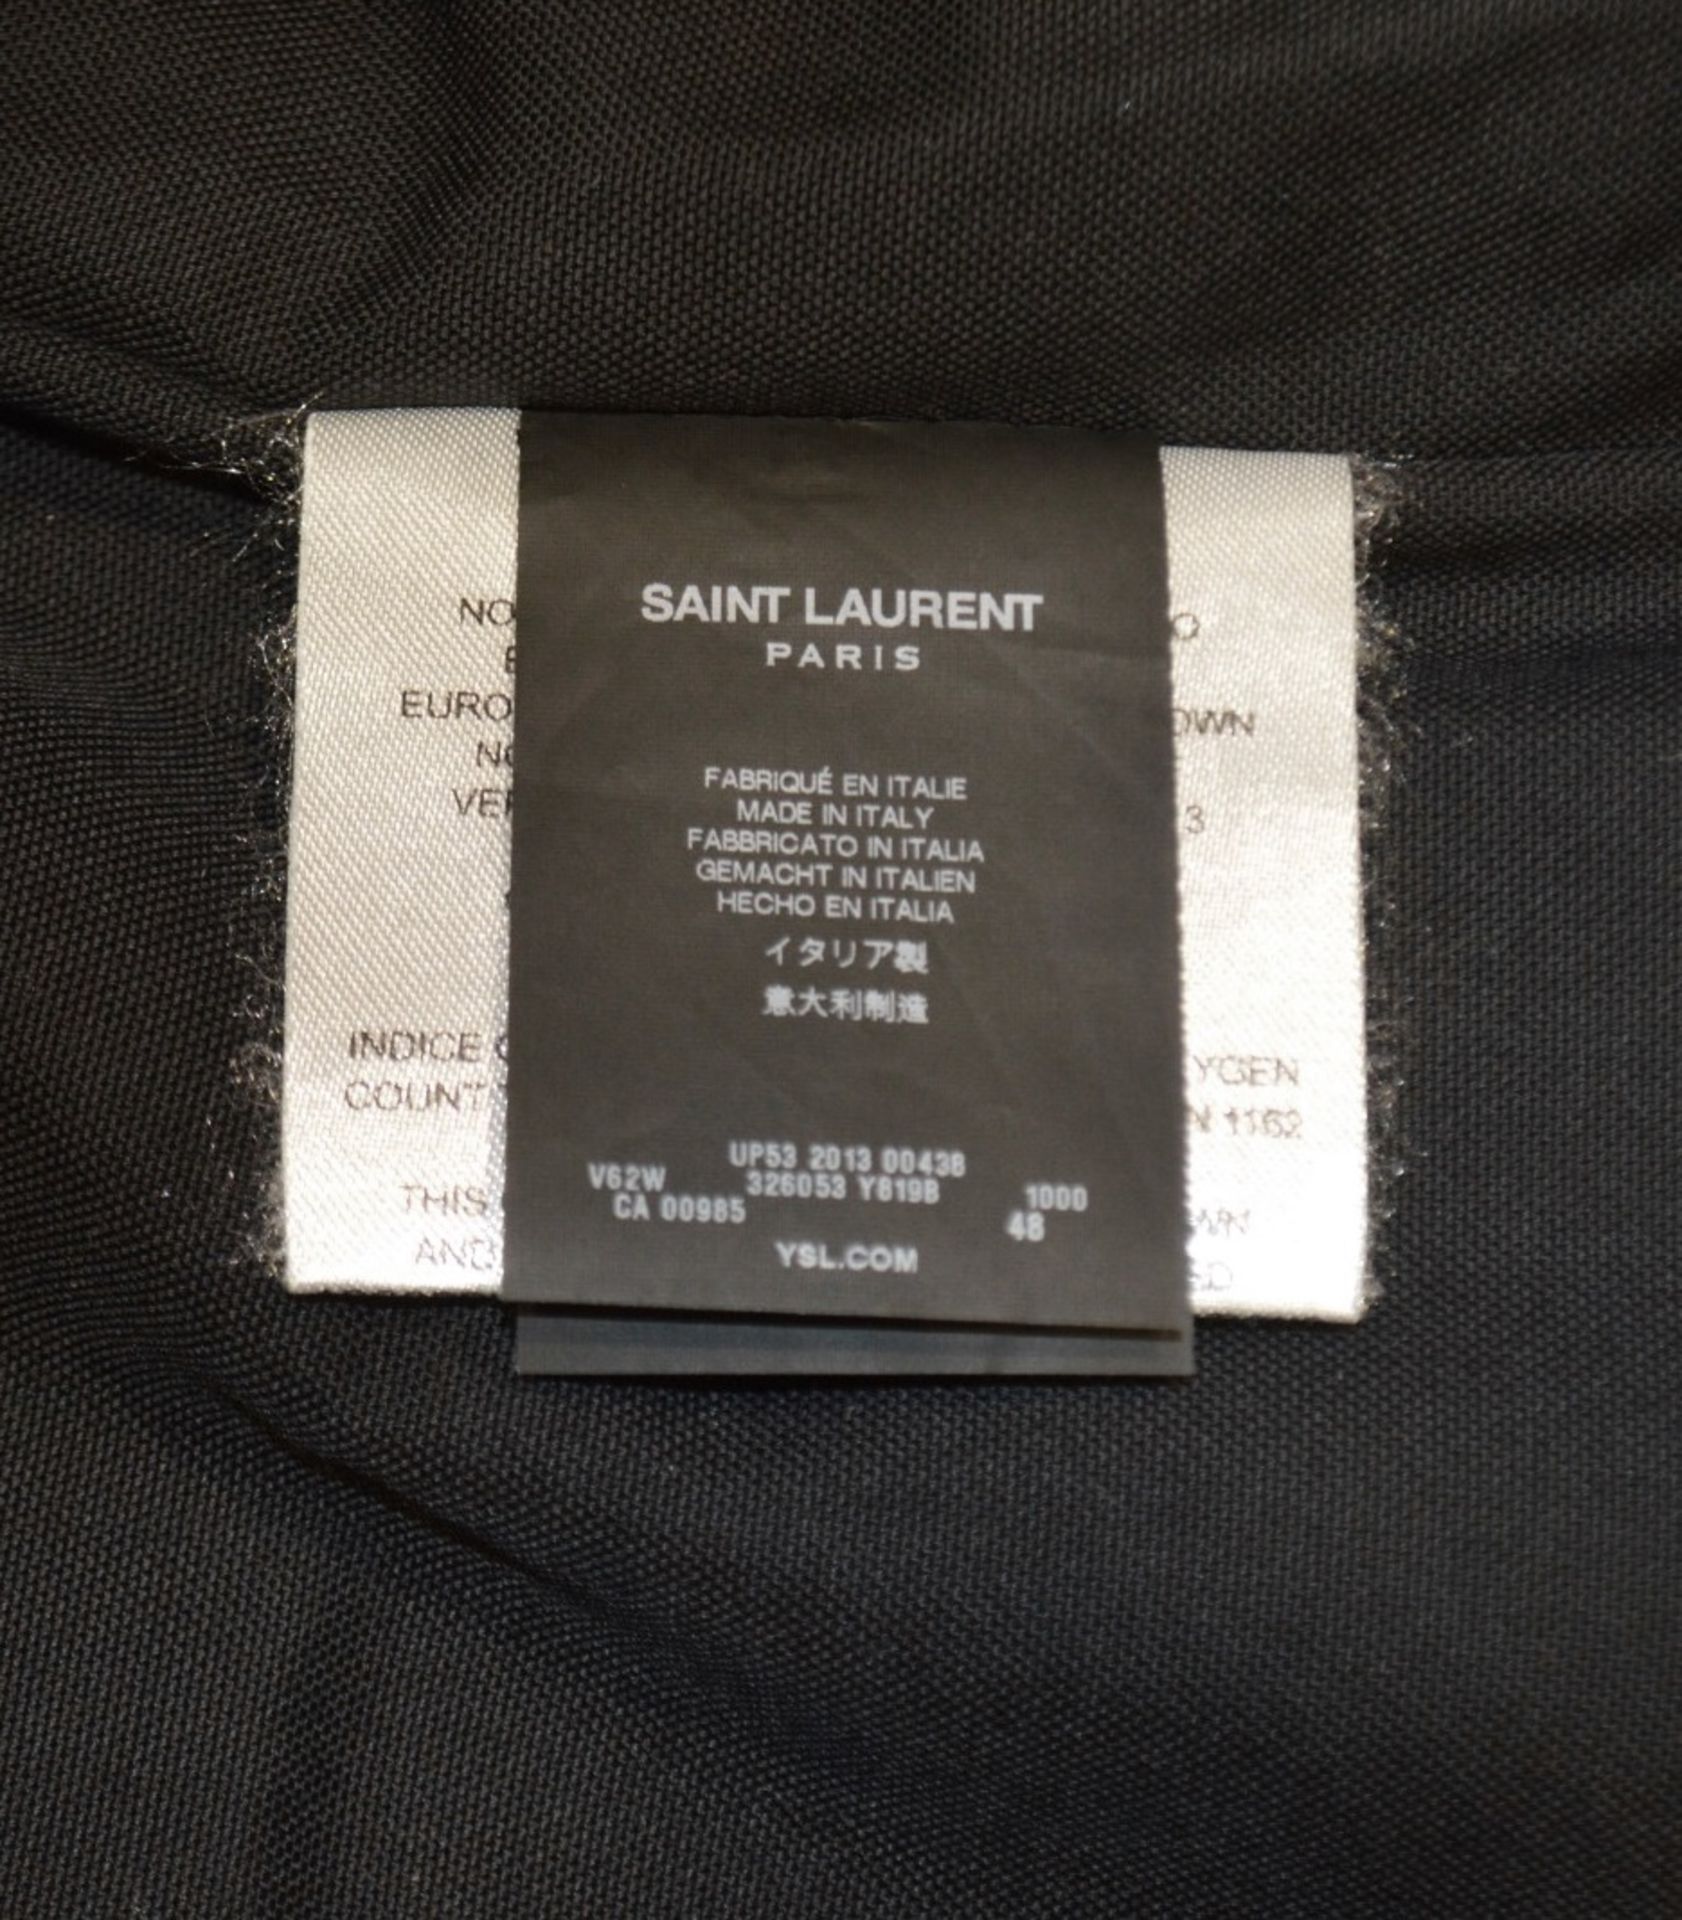 1 x Men's Genuine Yves Saint Laurant Gillet / Body Warmer In Black With Leather Panelling - Image 6 of 8